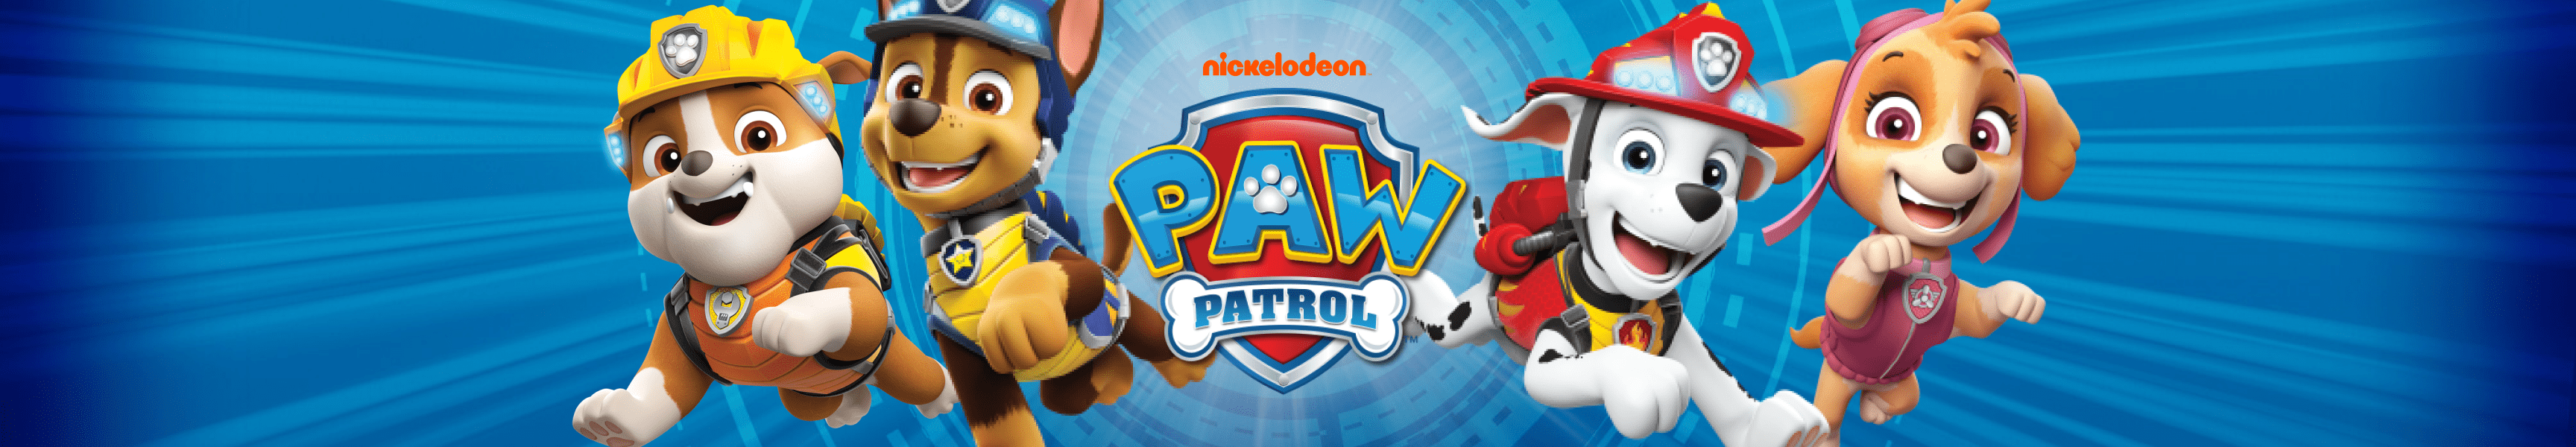 PAW Patrol Home & Office